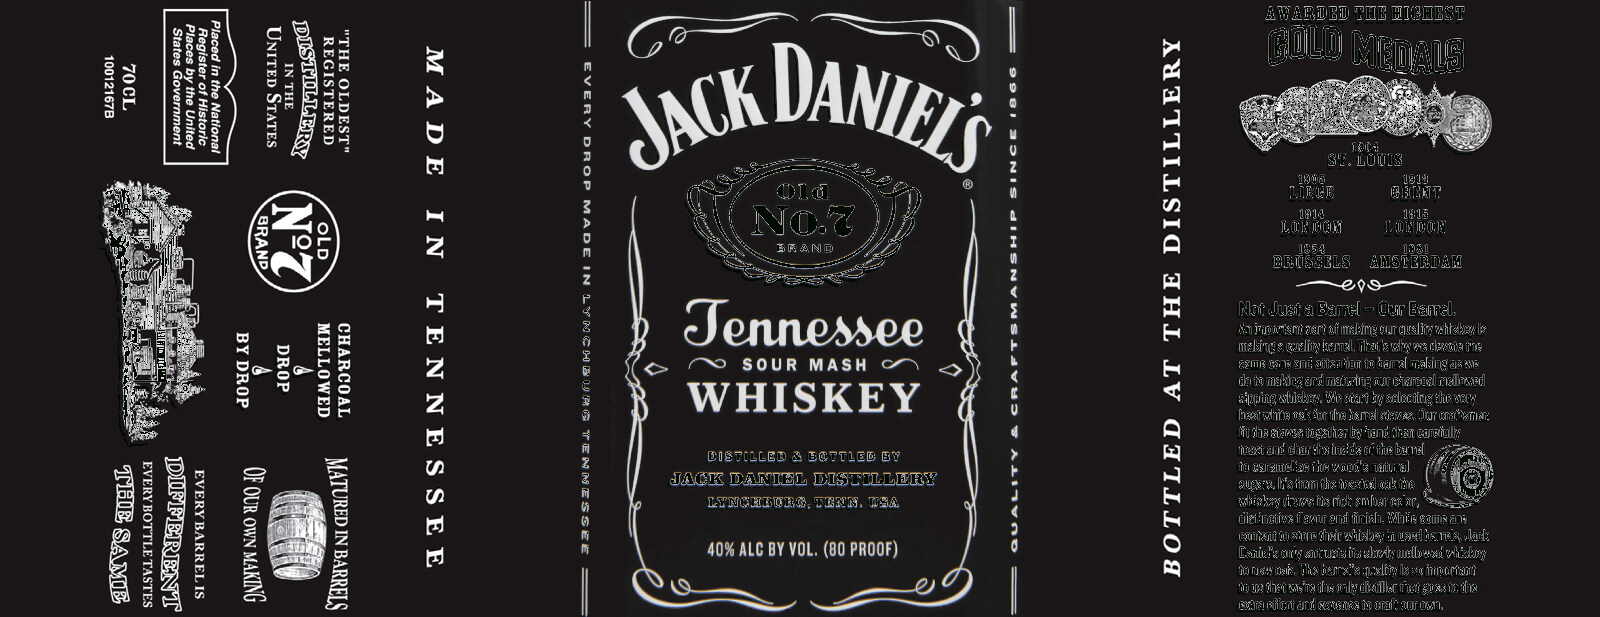 Labels Vector Whiskey, Picture #1116975 Labels Vector Whiskey For Blank Jack Daniels Label Template